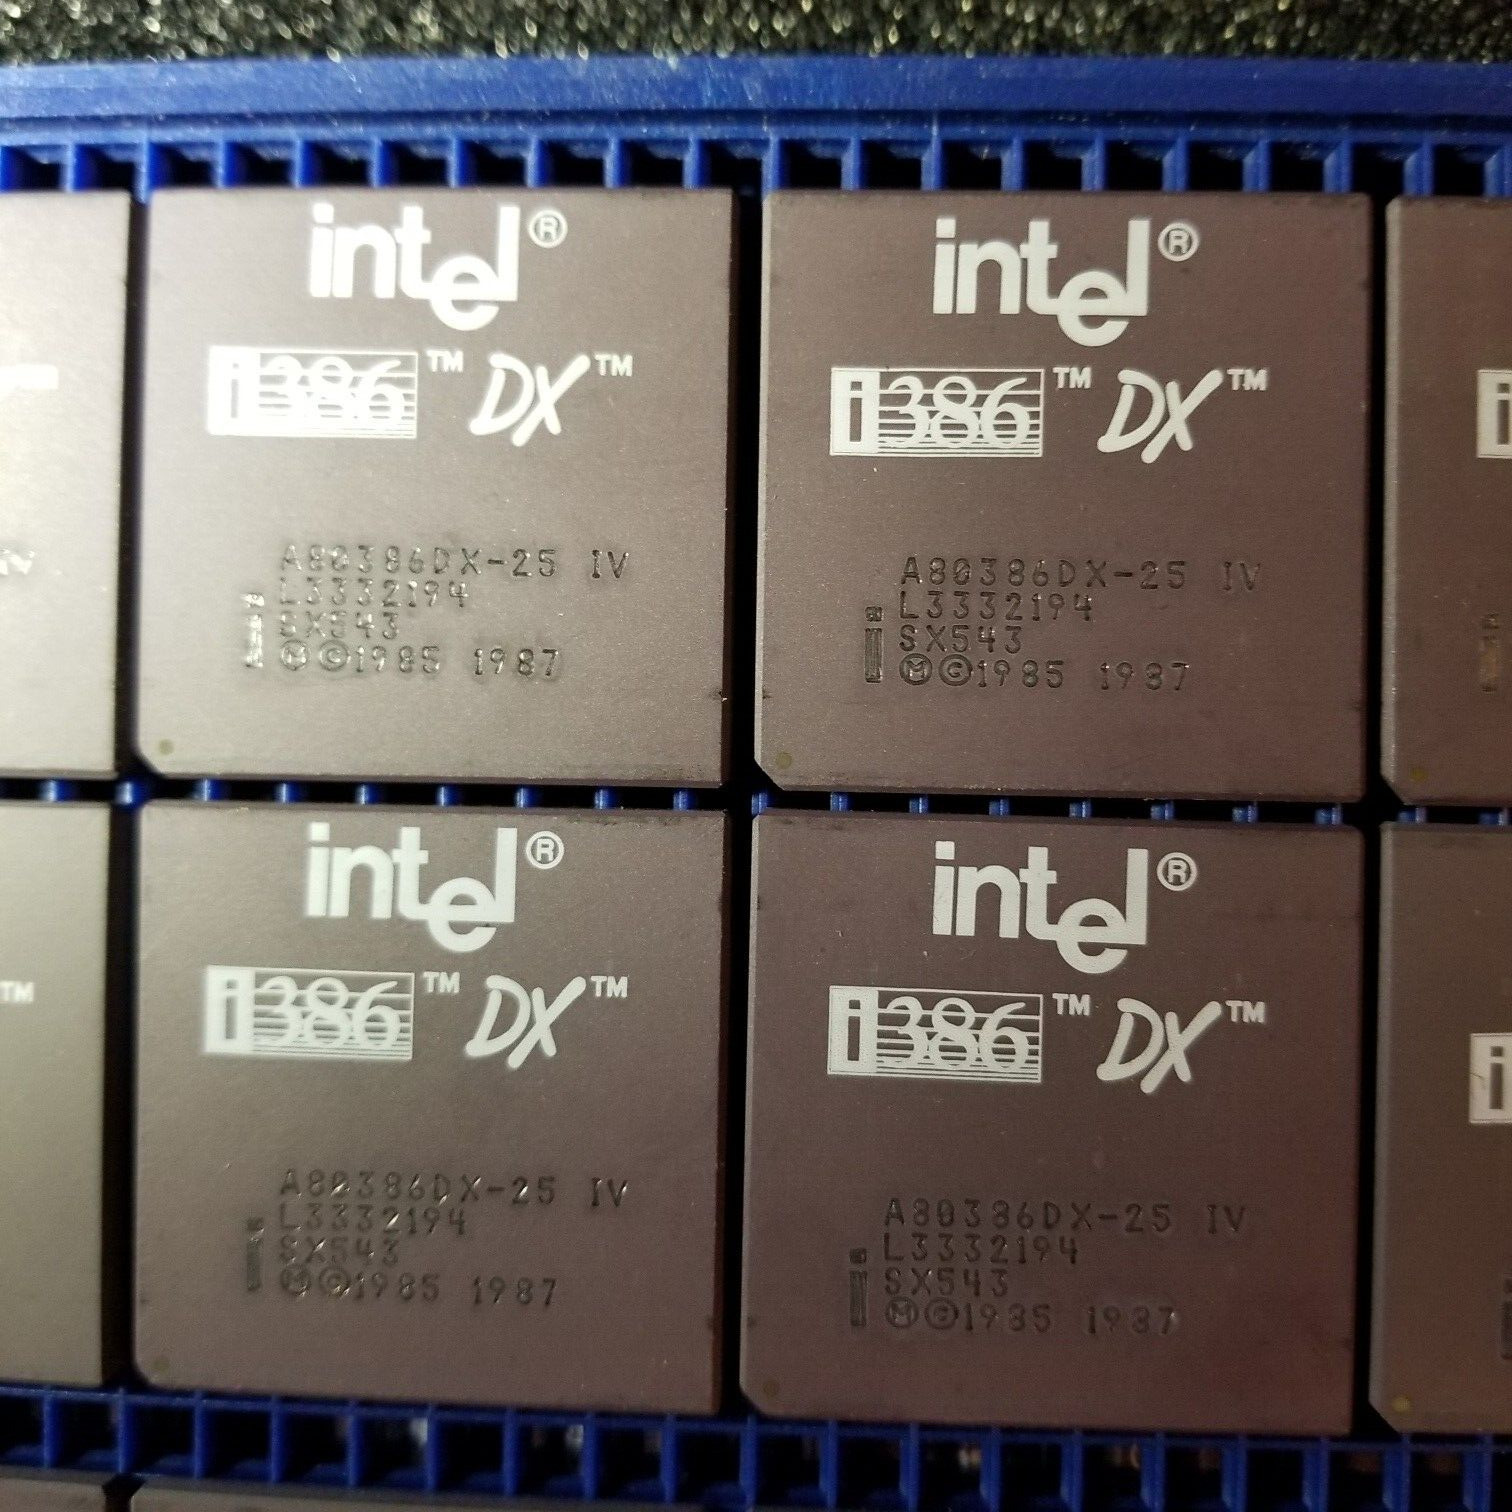 Intel i386 DX A80386DX-25 IV,  Processor CPU, New, Tested working, USA stock